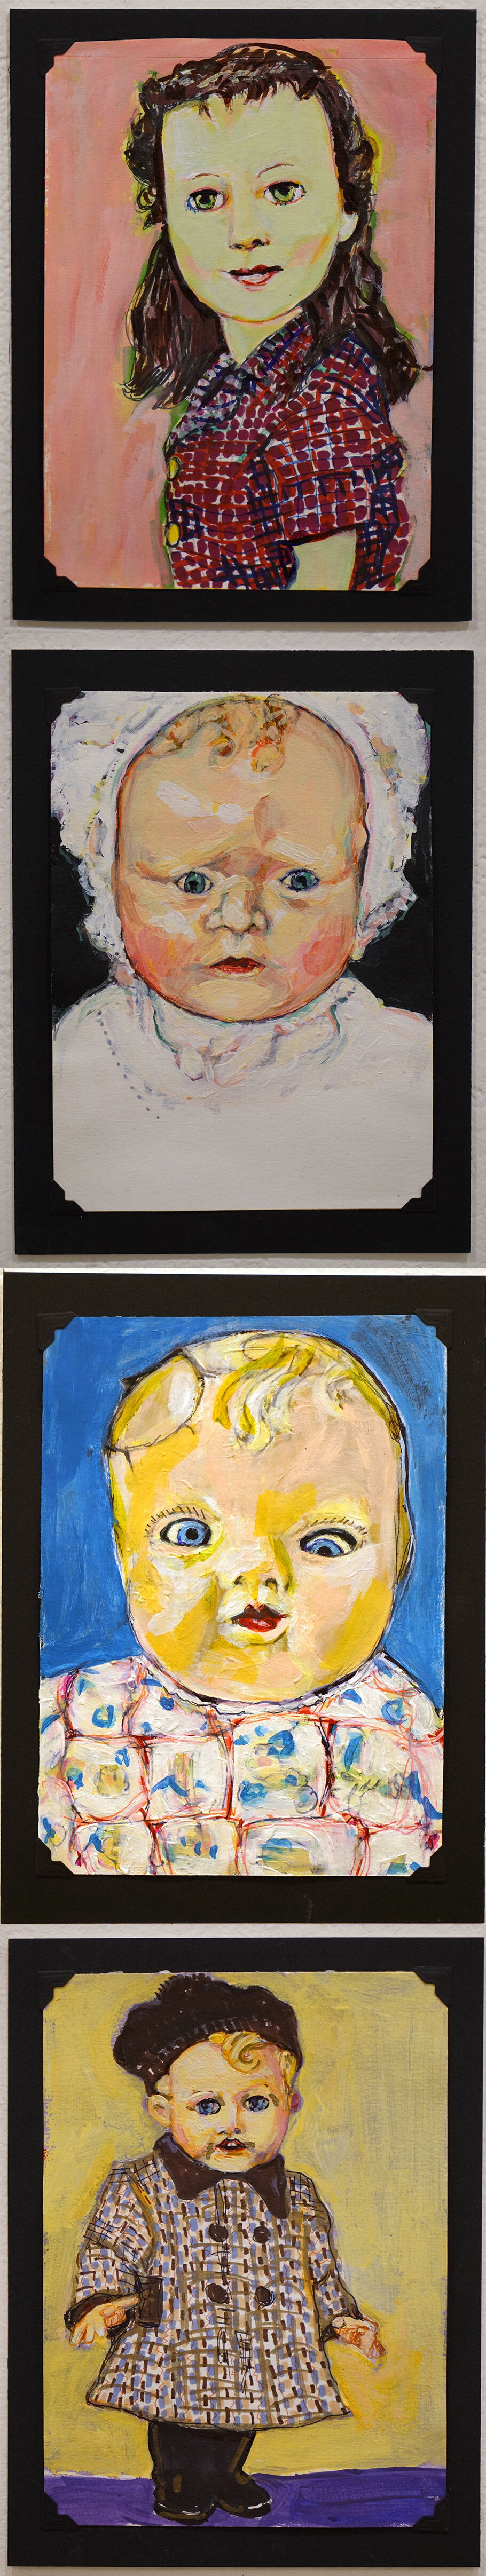  Elizabeth Wood (PiV ‘87), (From top to bottom):  Lori Martin doll,  2018 ; Baby Doll with bonnet,  2018;  Baby Doll with cracked head , 2019;  1950s Pedigree Doll with molded hair , 2018. Each acrylic on paper, 5.5 x 8.5 in. 